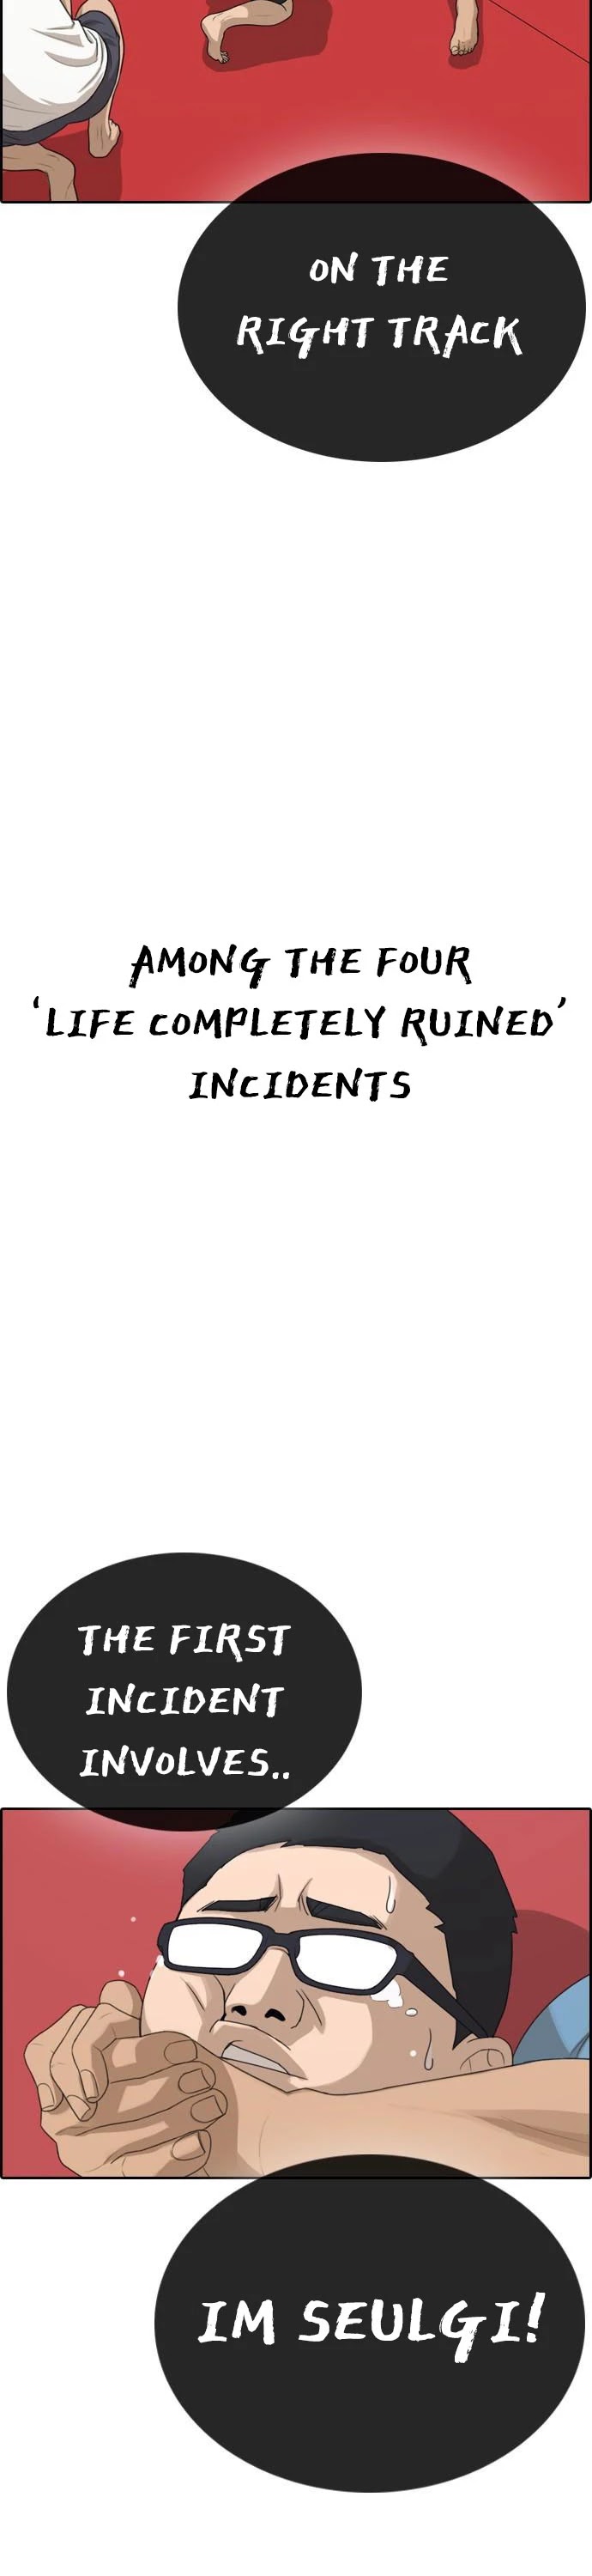 Life Completely Ruined - Page 2